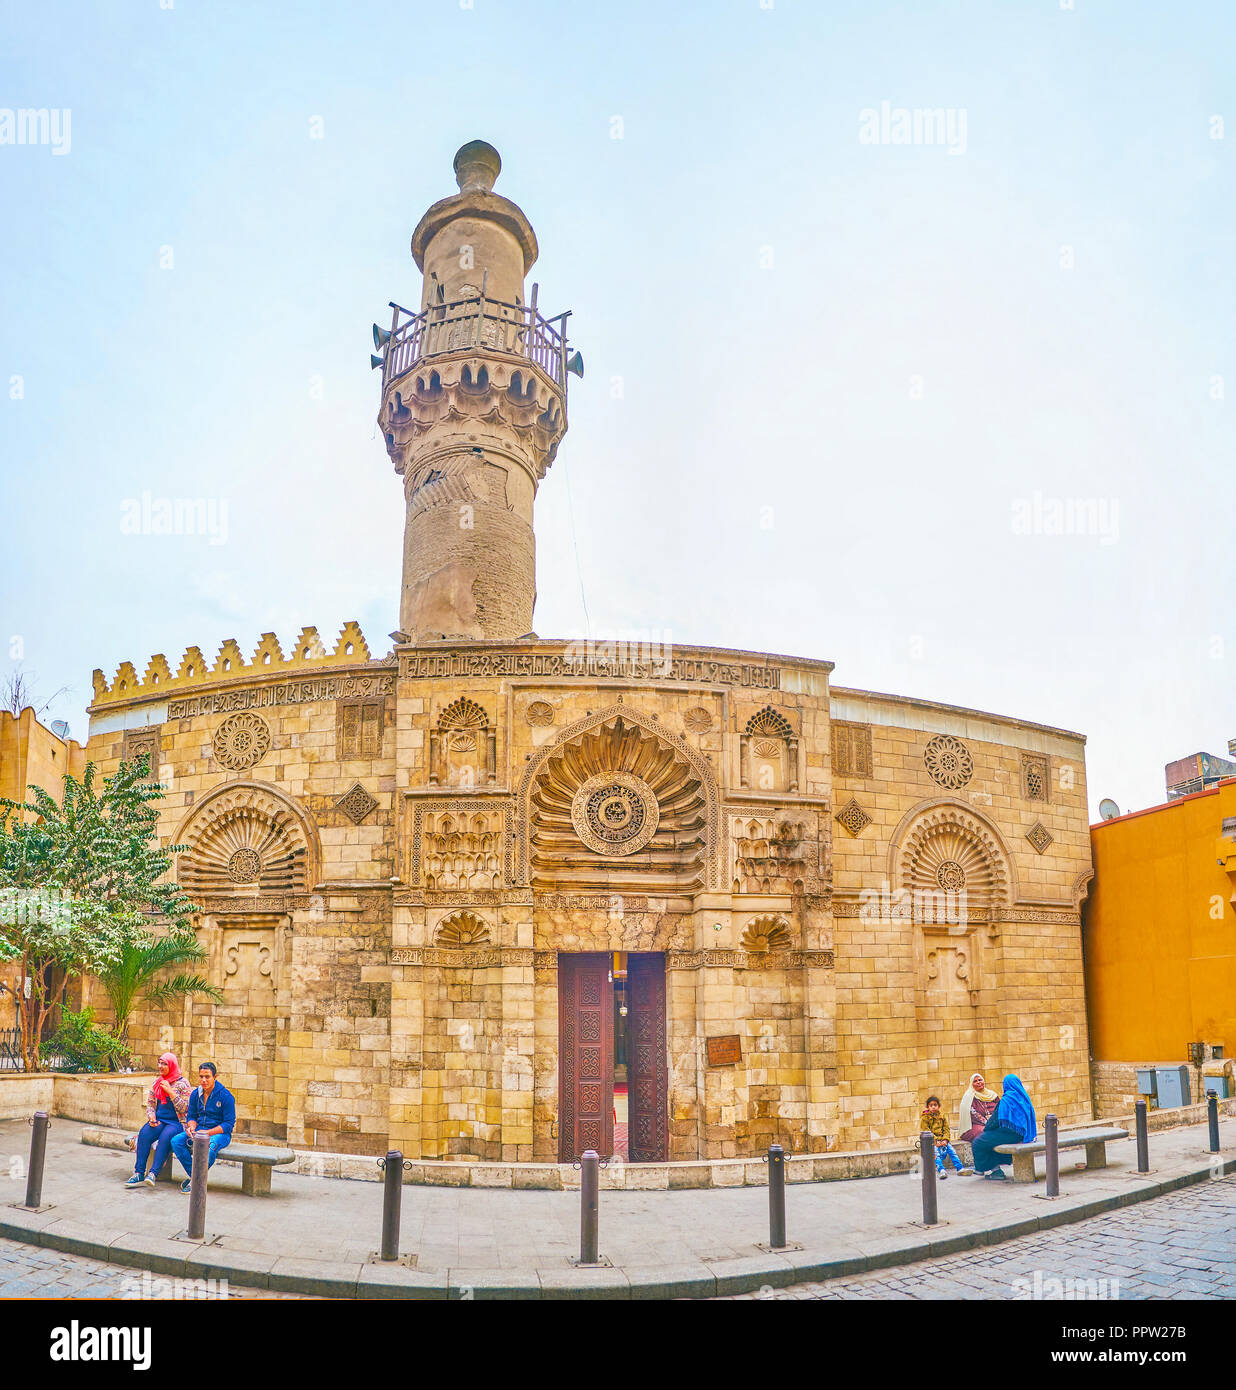 CAIRO, EGYPT - DECEMBER 23, 2017: The medieval Aqmar Mosque with shabby minaret is also called the Grey Mosque, located on Al-Muizz street in Islamic  Stock Photo